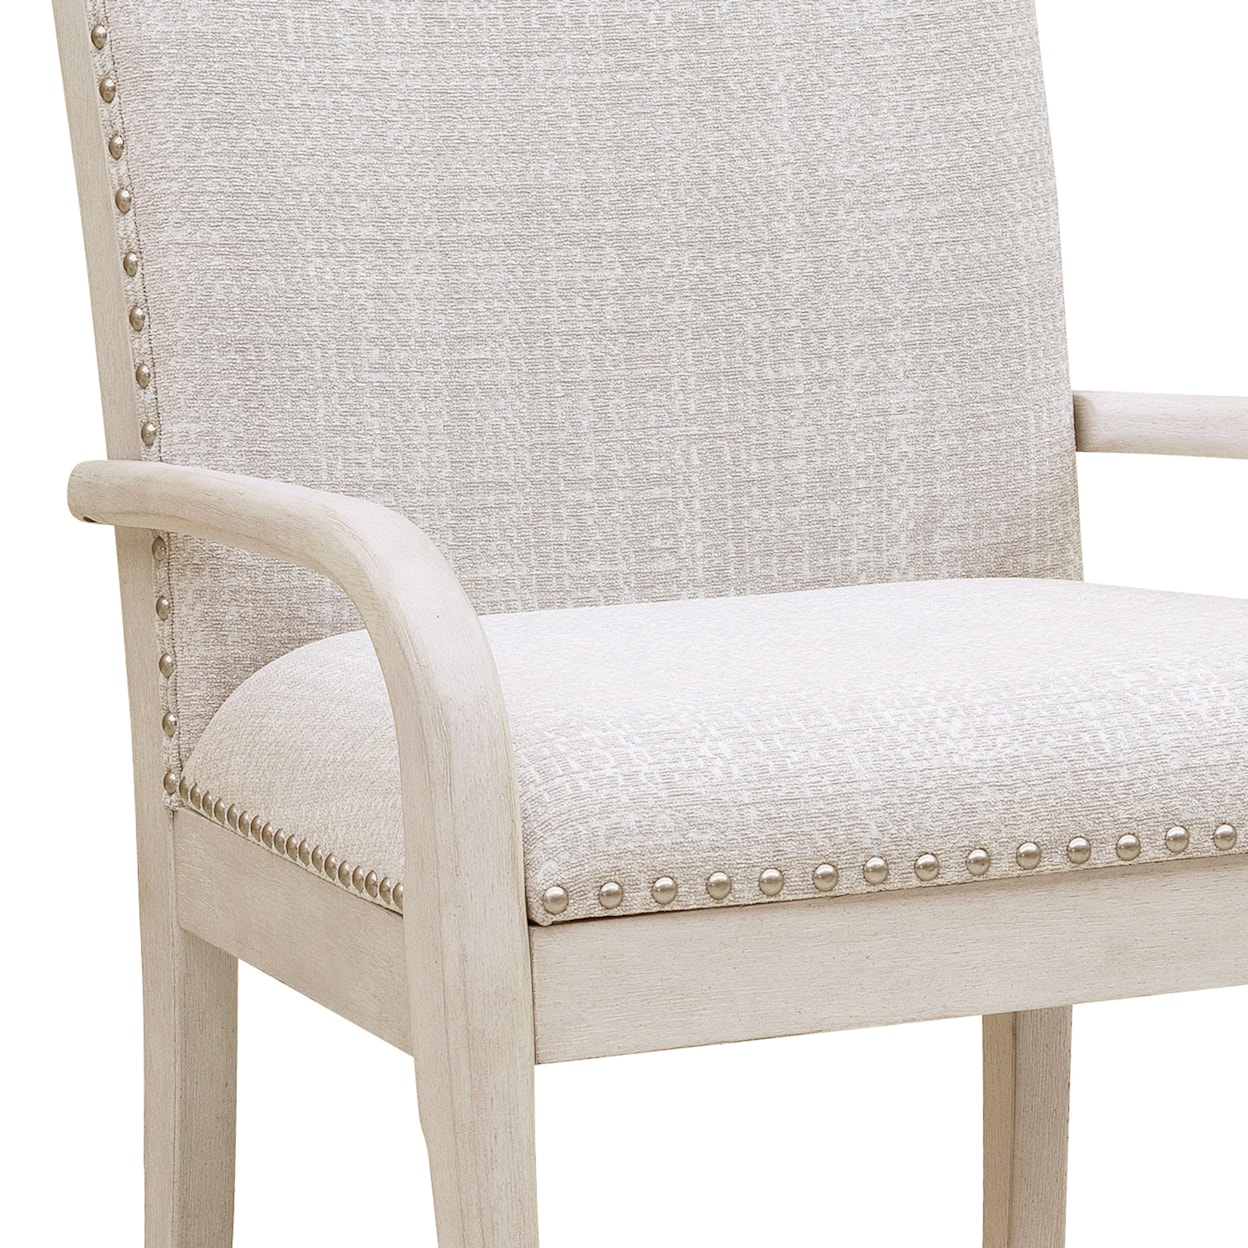 Pulaski Furniture Ashby Place Upholstered Dining Arm Chair